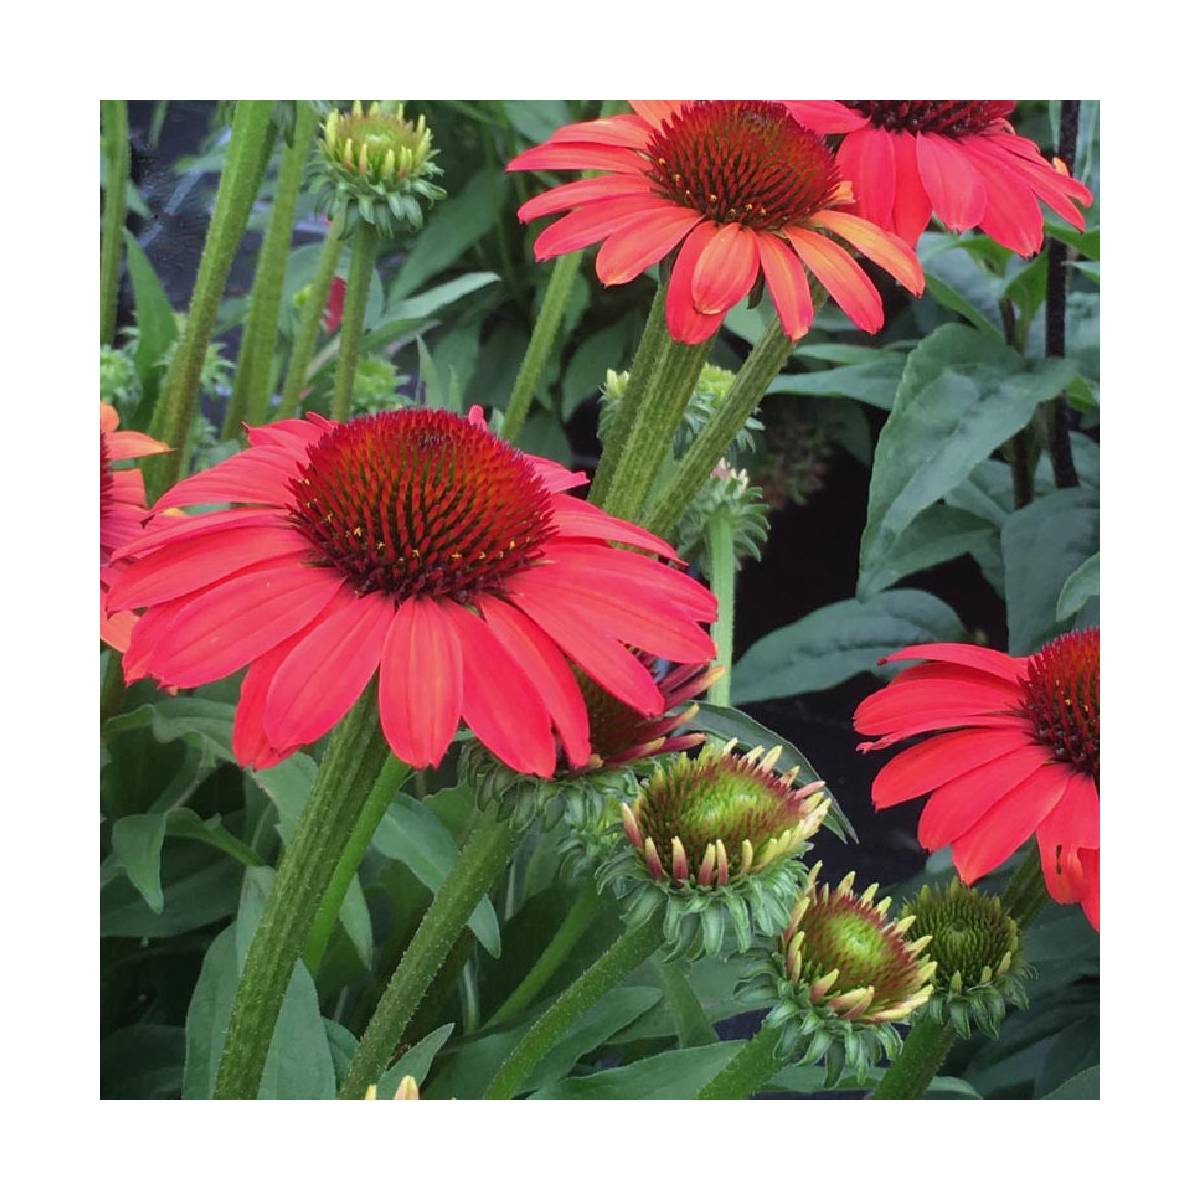 Échinacée sunseekers® 'coral'/echinacea x sunseekers® 'coral'[-]godet